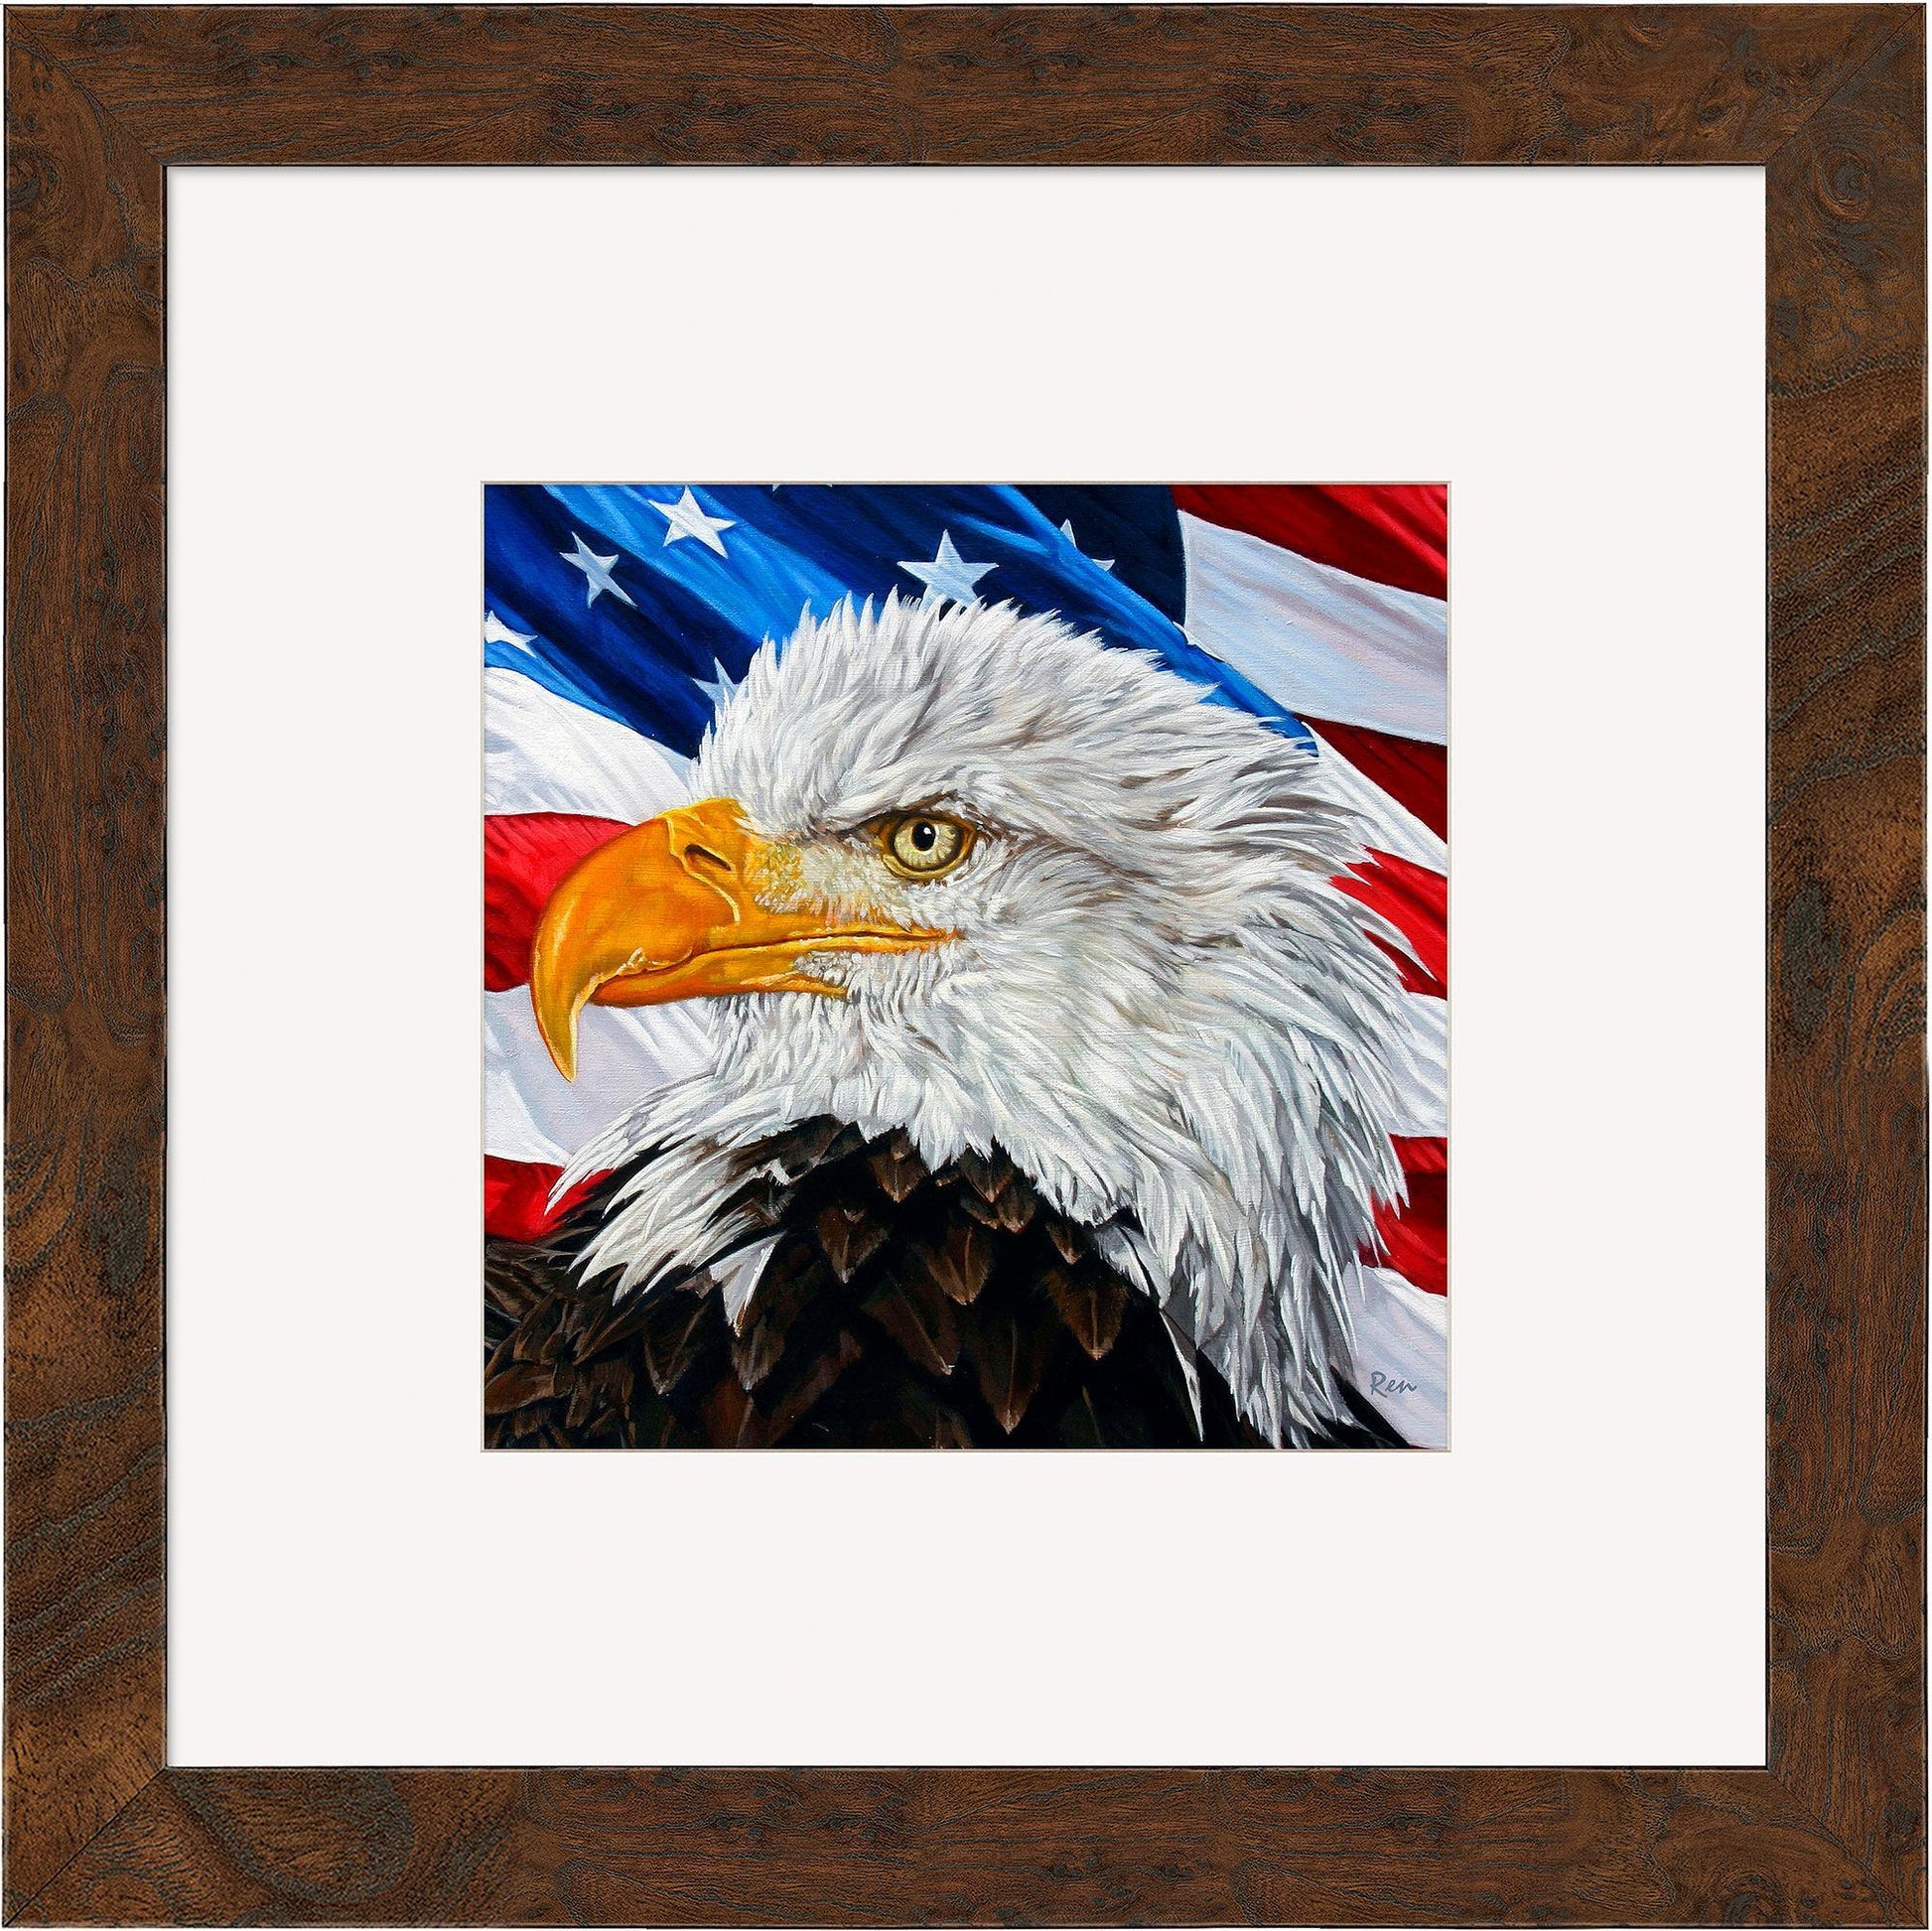 Let Freedom Ring—Bald Eagle Contempo Square - Wild Wings